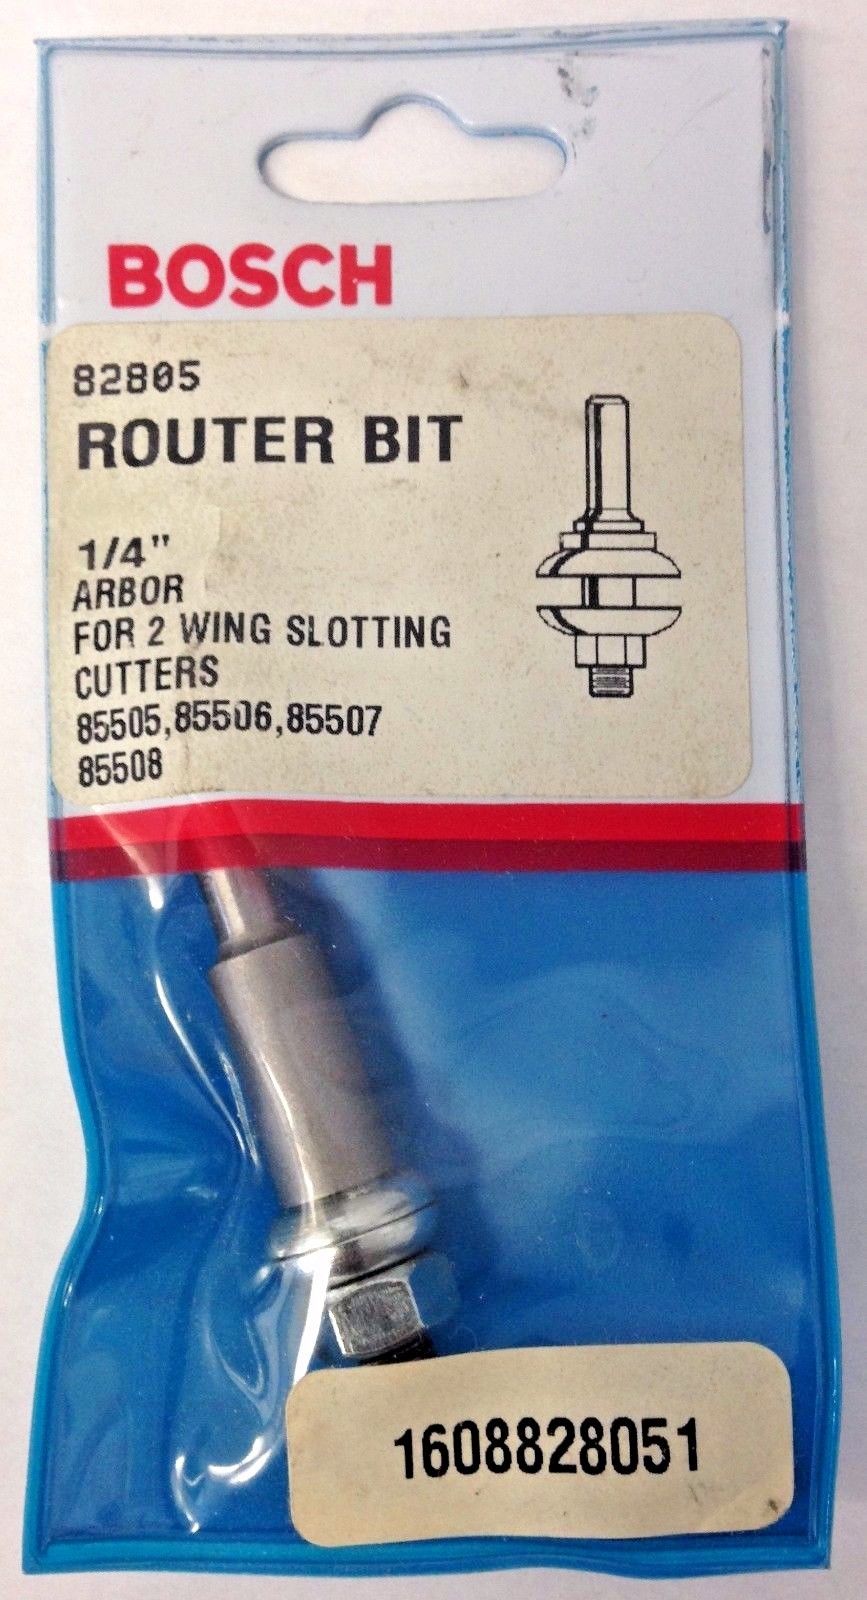 Bosch 82805 1/4" Arbor For 2 Wing Slotting Cutters Router Bit USA